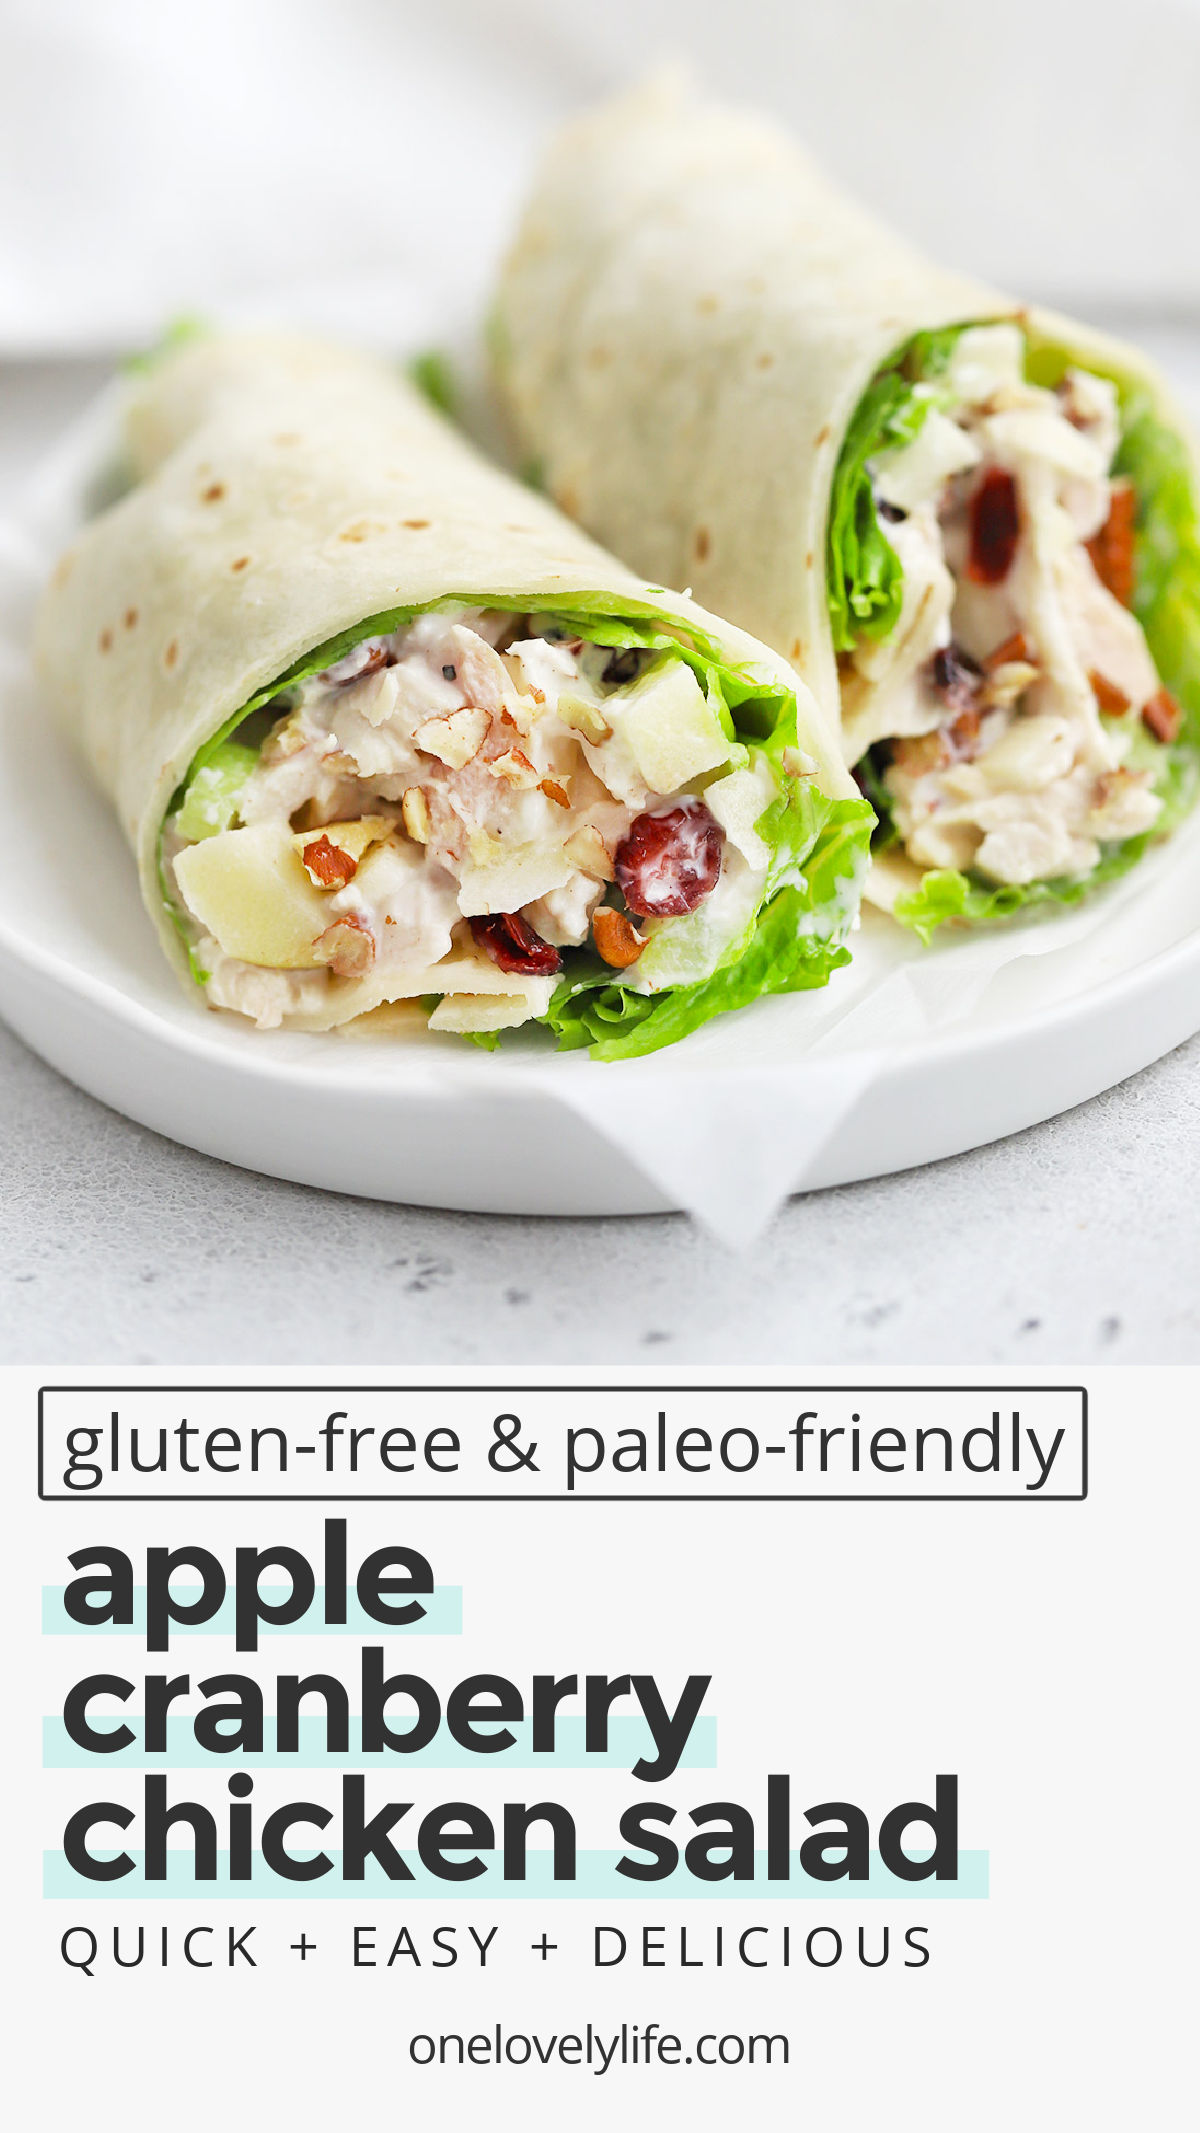 Apple Chicken Salad - This chicken salad with apples is perfect for the start of fall! It's the perfect combination of savory, sweet, creamy, and crunchy. Don't miss all our serving ideas below! (Gluten-Free, Paleo-Friendly) // Apple Chicken Salad // Pecan Chicken Salad // Cranberry Pecan Chicken Salad // Fall Chicken Salad